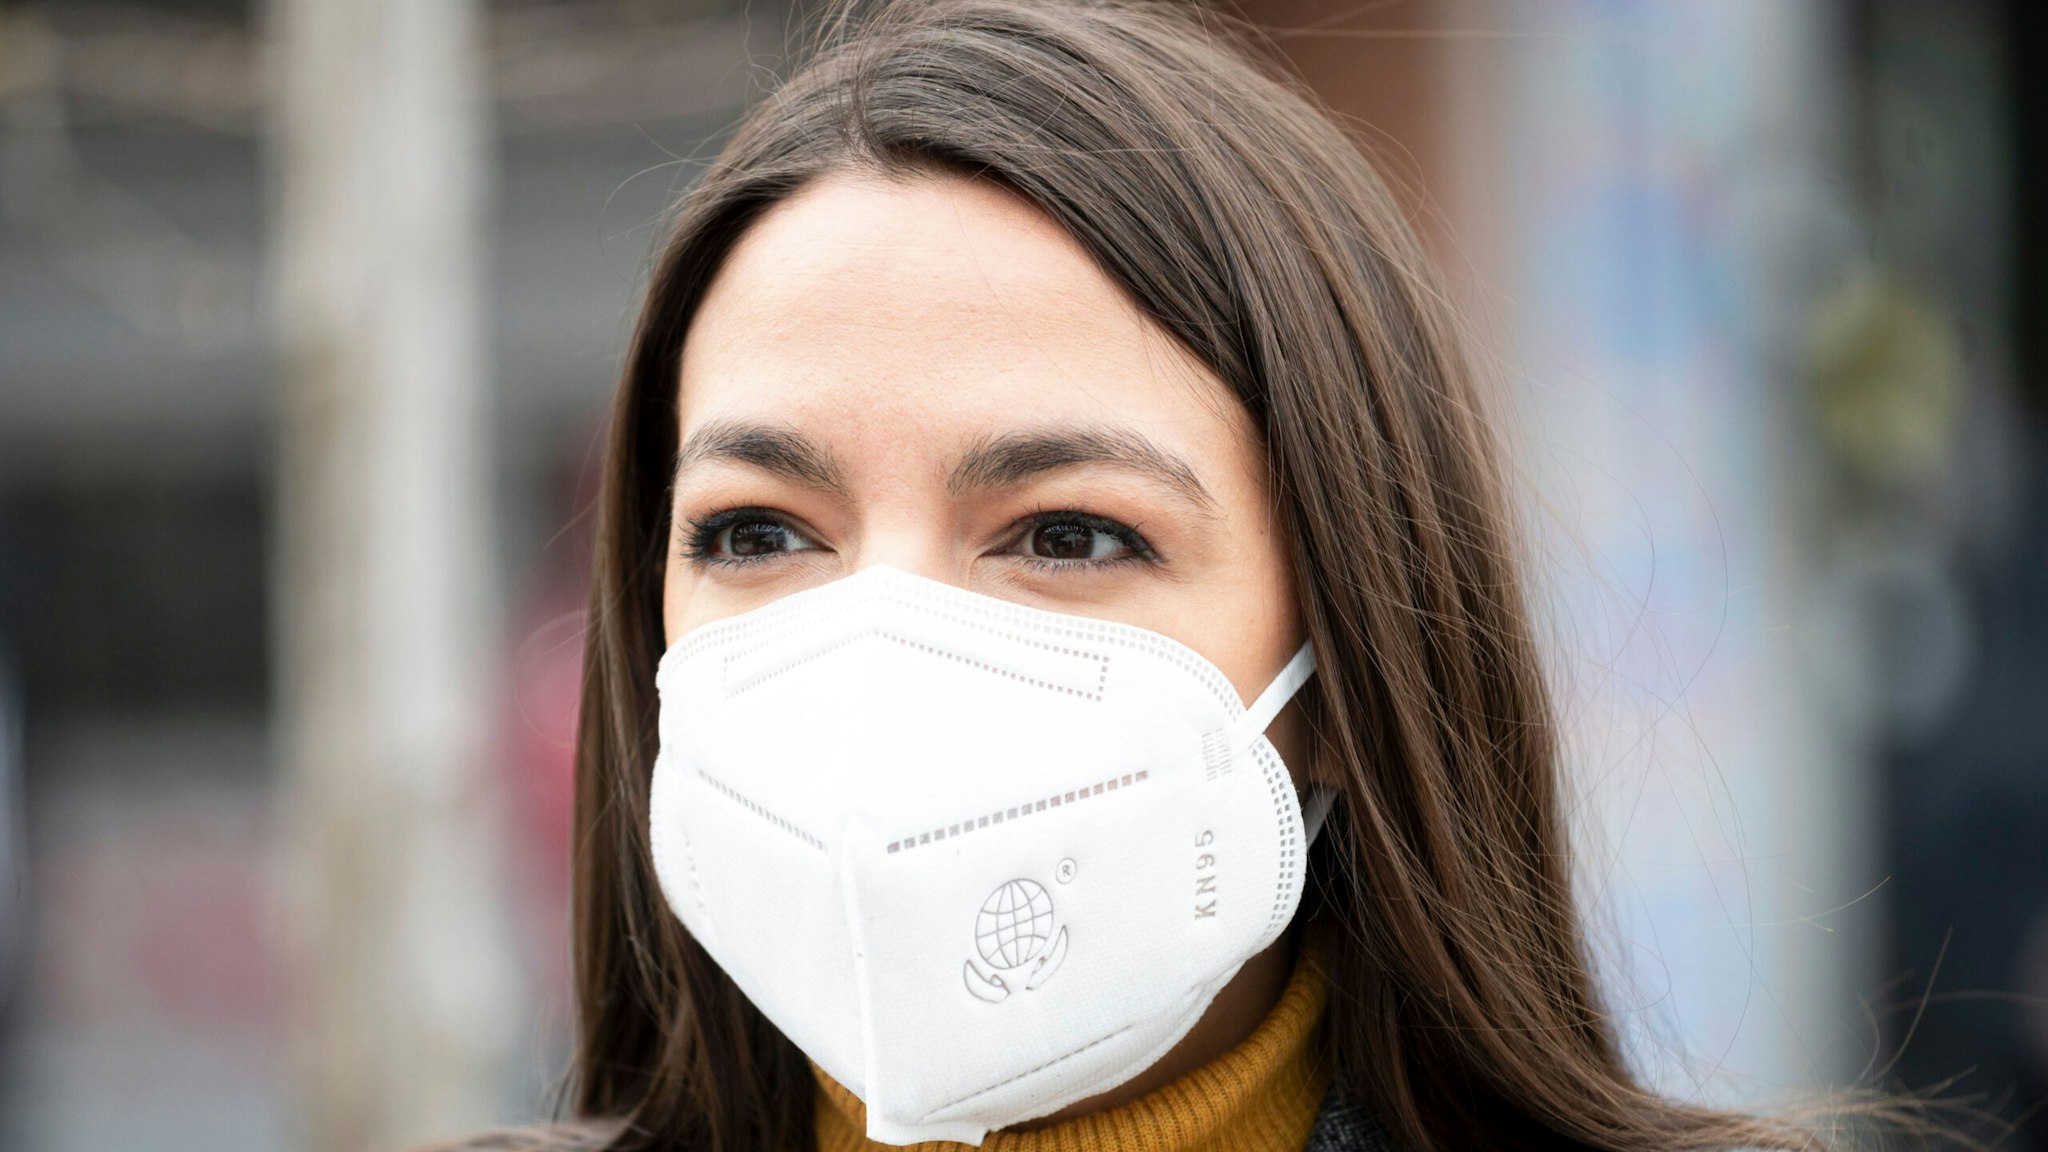 Democratic Congresswoman from New York Alexandria Ocasio-Cortez wears a face mask to protect herself from the coronavirus, during a press conference in the Corona neighbourhood of Queens on April 14, 2020 in New York City. - Senate Minority Leader Chuck Schumer and Democratic Rep. Alexandria Ocasio-Cortez hold a press conference amid the coronavirus pandemic to call on the Federal Emergency Management Administration (FEMA) to begin approving disaster funds to help families in lower-income communities and communities of color pay for funeral costs.